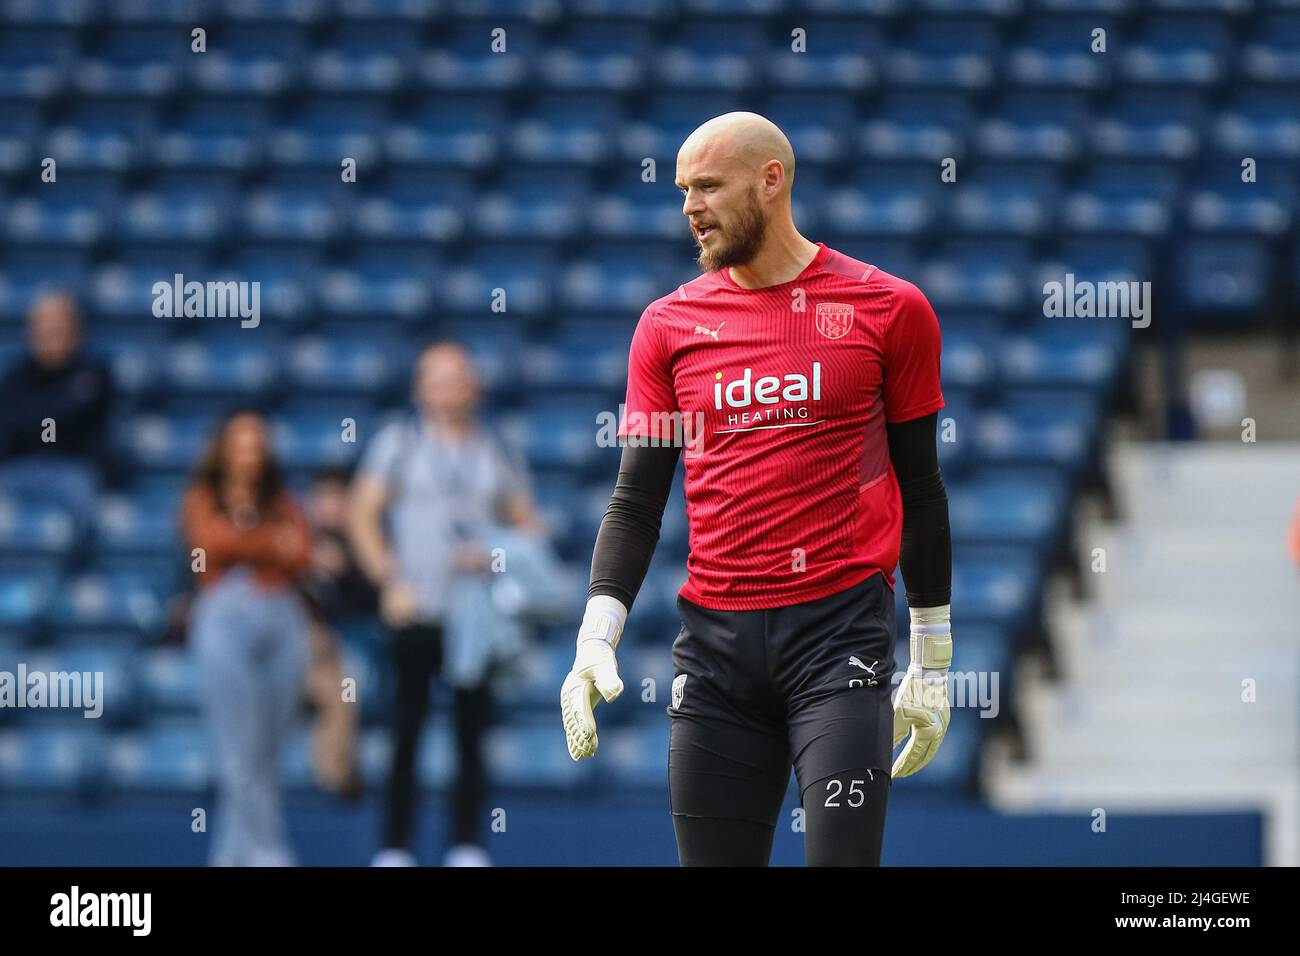 David Button #25 of West Bromwich Albion warms up ahead of kick off Stock Photo